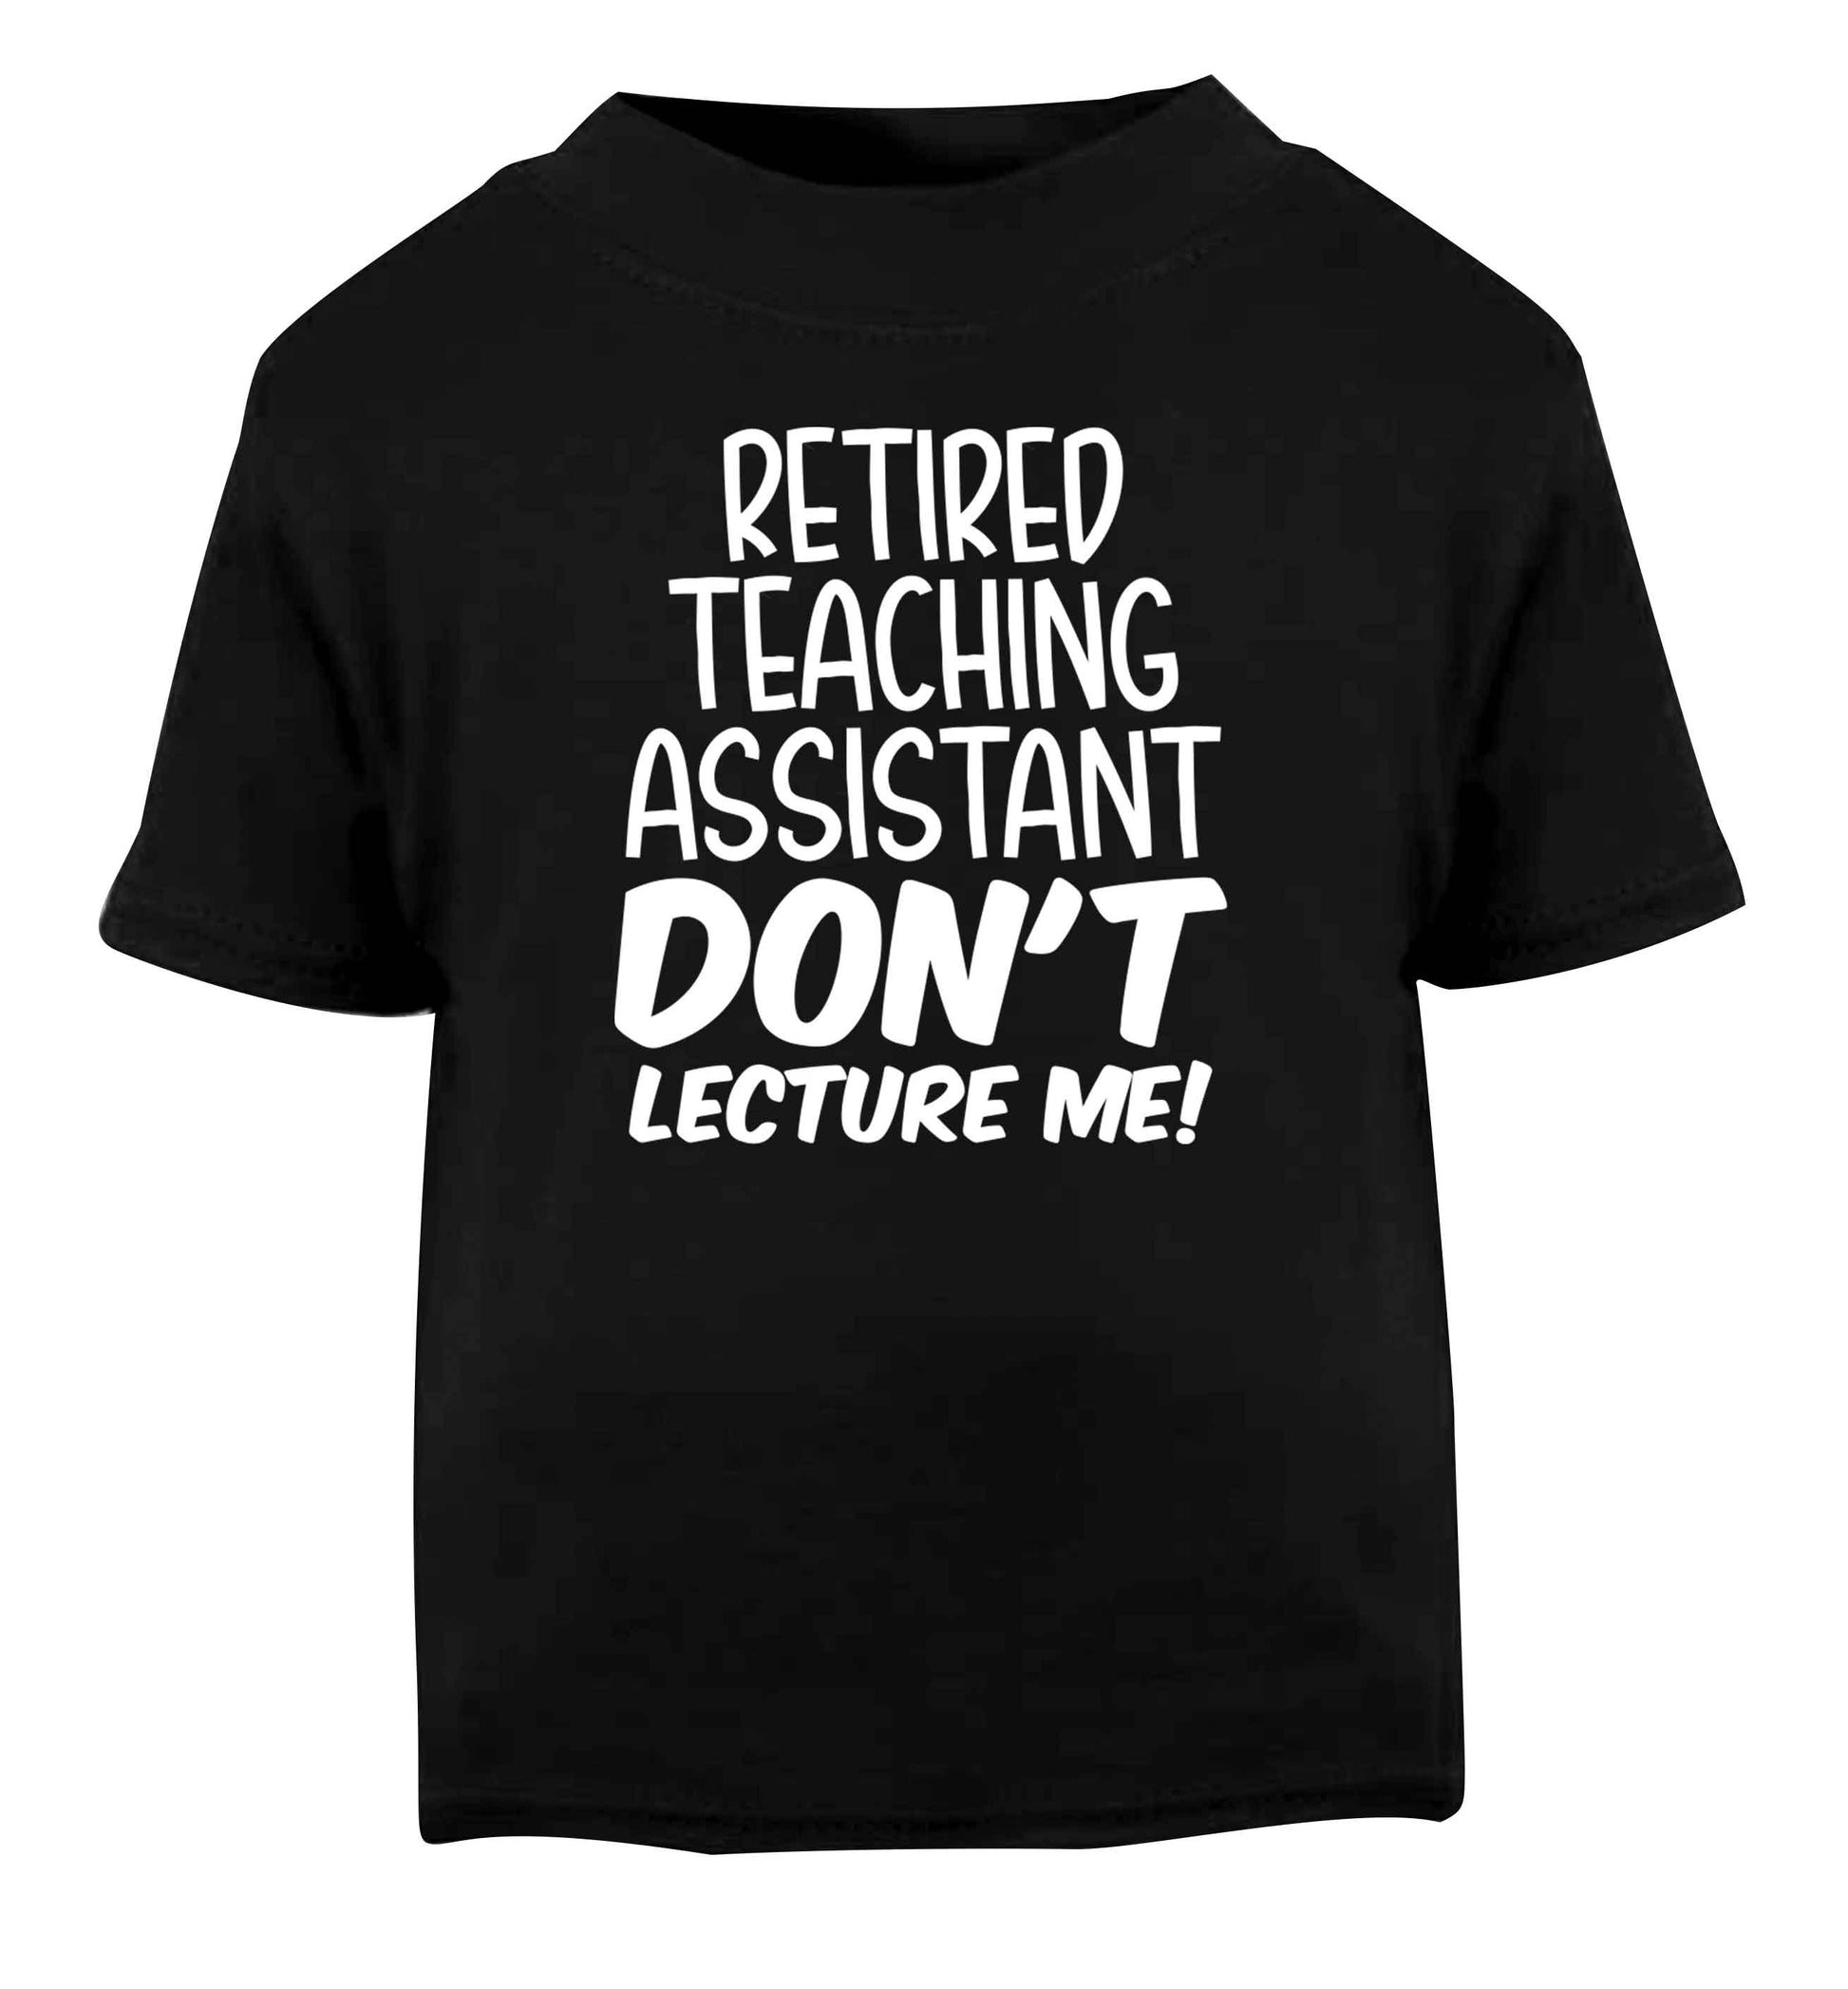 Retired teaching assistant don't lecture me Black Baby Toddler Tshirt 2 years